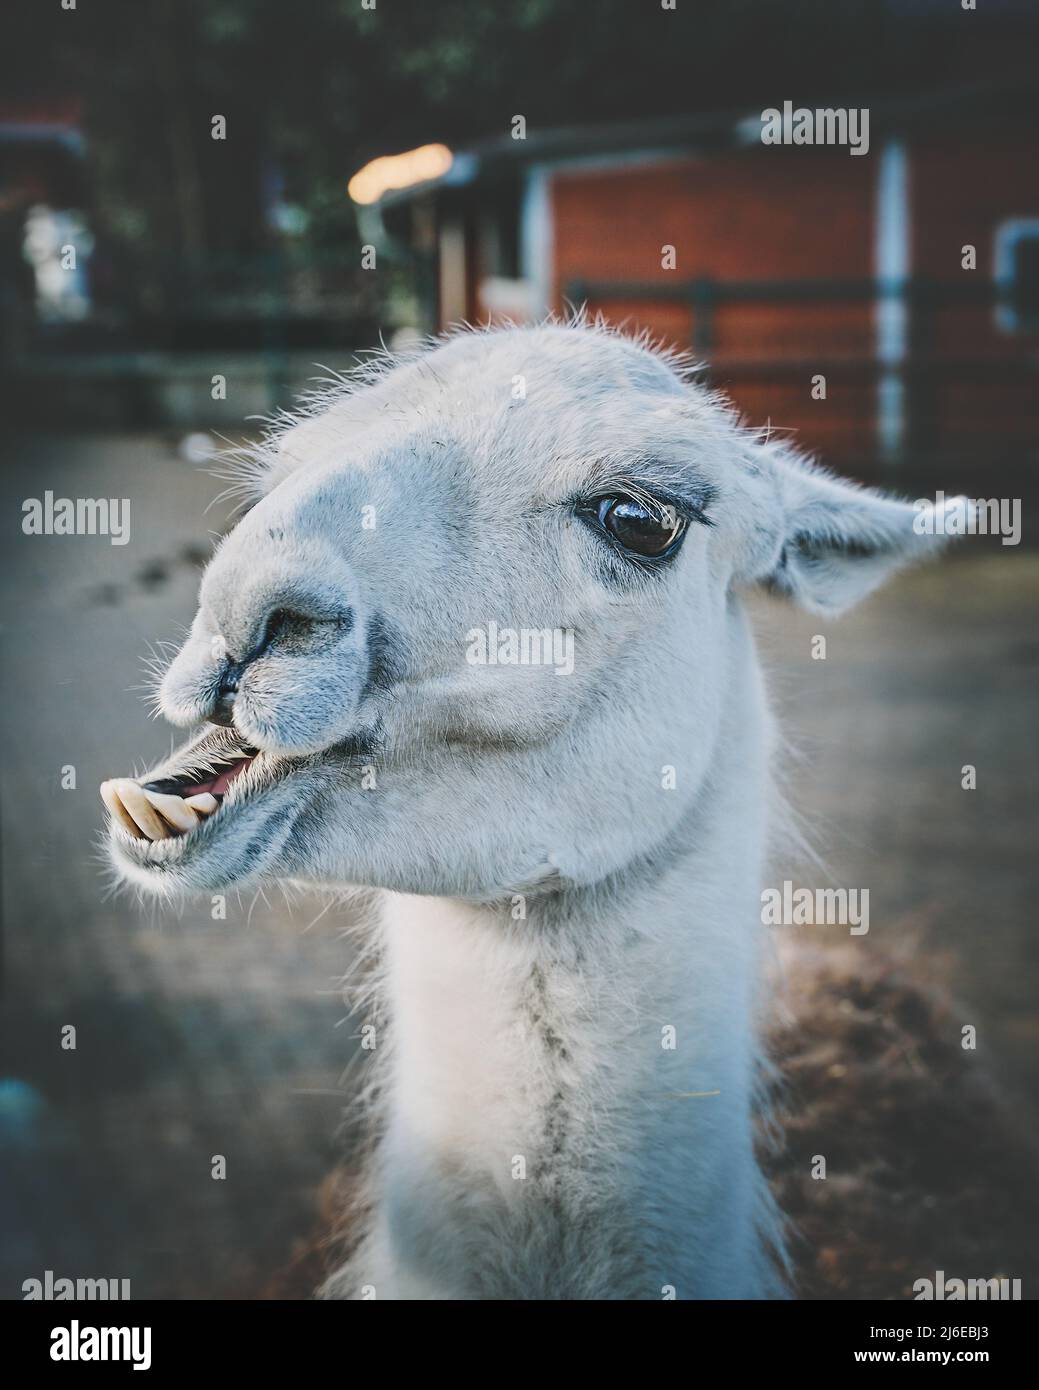 Friendly and Silly Lama in a Sanctuary. High quality photo Stock Photo